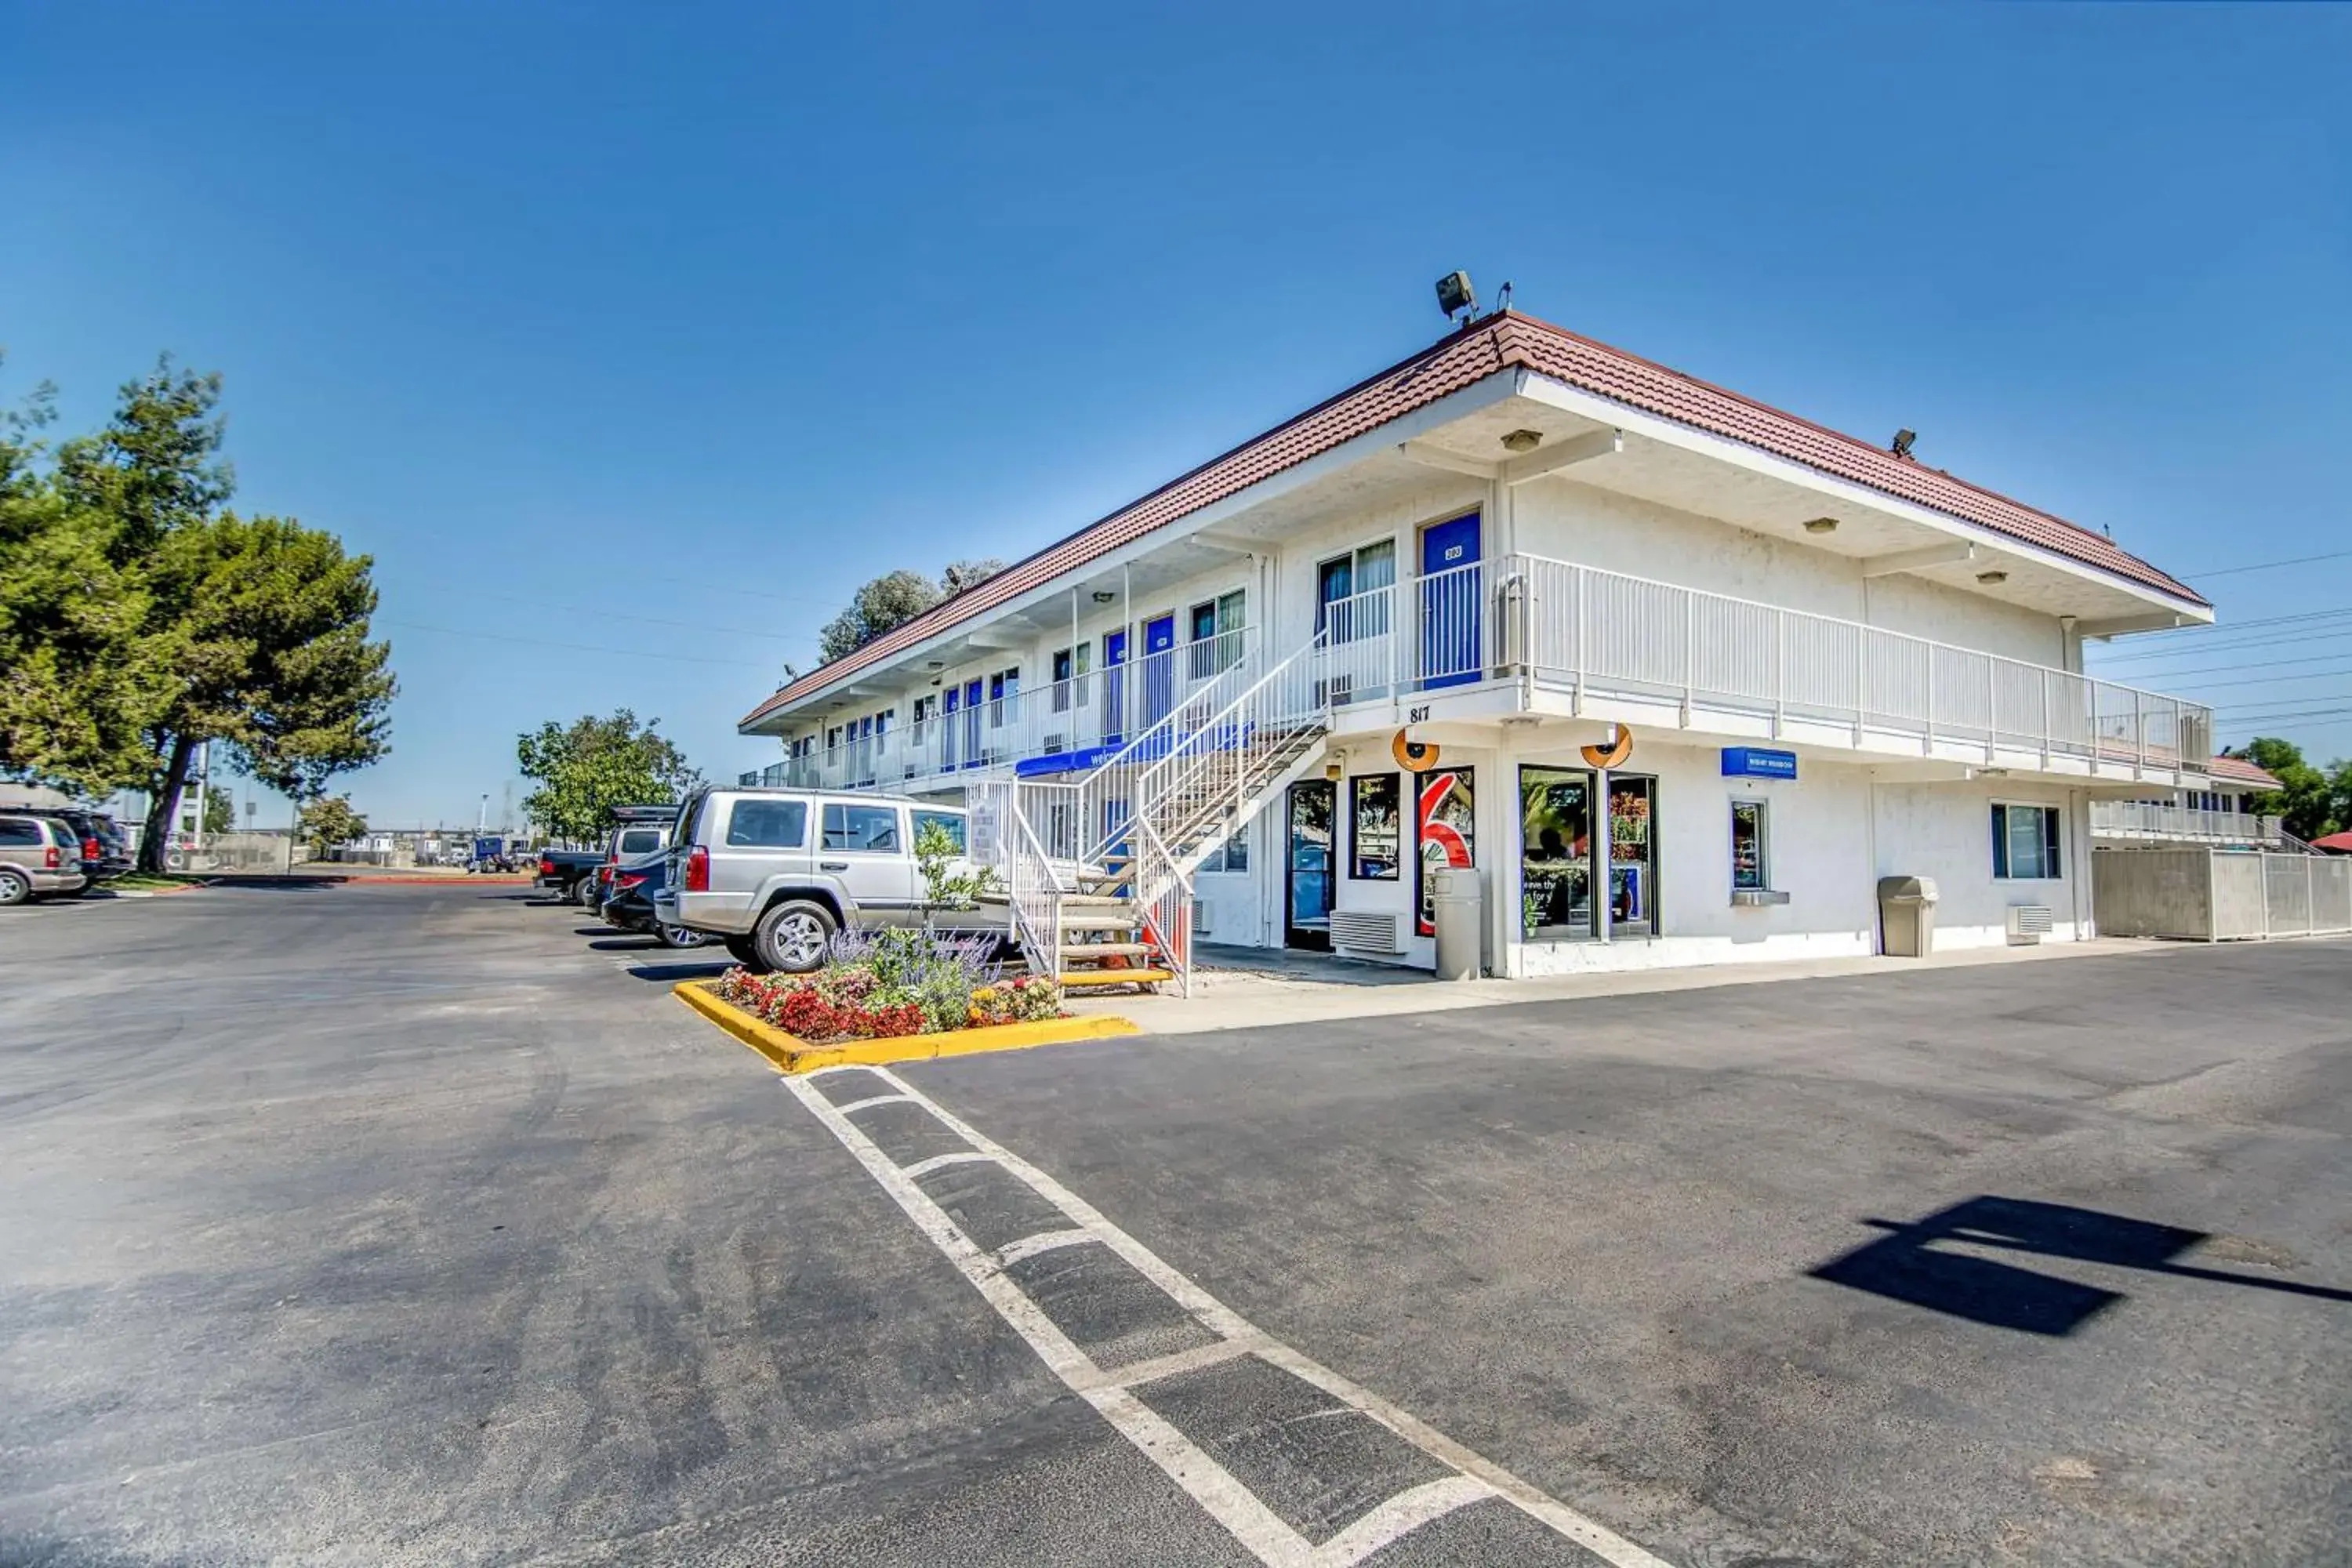 Property Building in Motel 6-Stockton, CA - Charter Way West